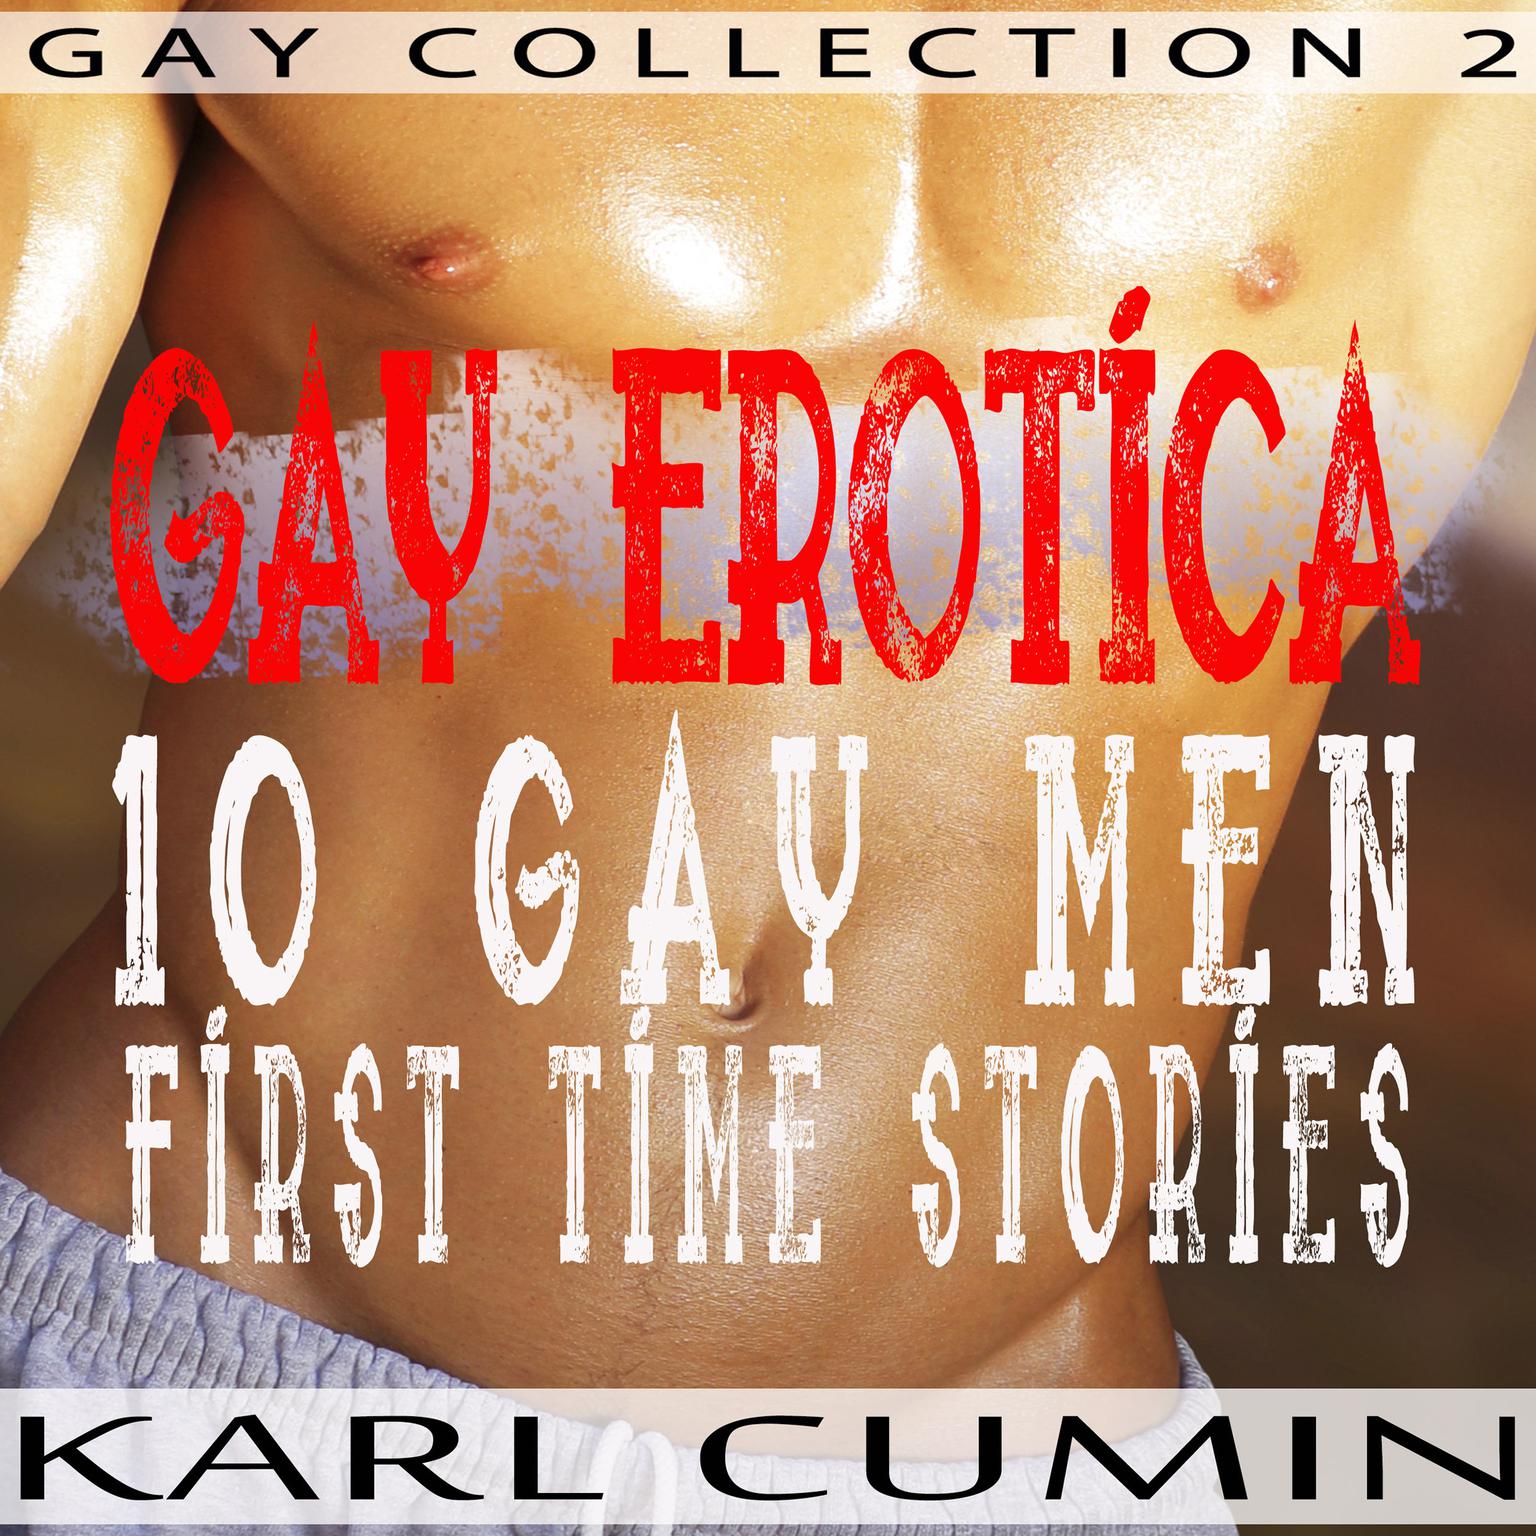 Gay Erotica – 10 Gay Men First Time Stories (Gay Collection 2) Audiobook, by Karl Cumin